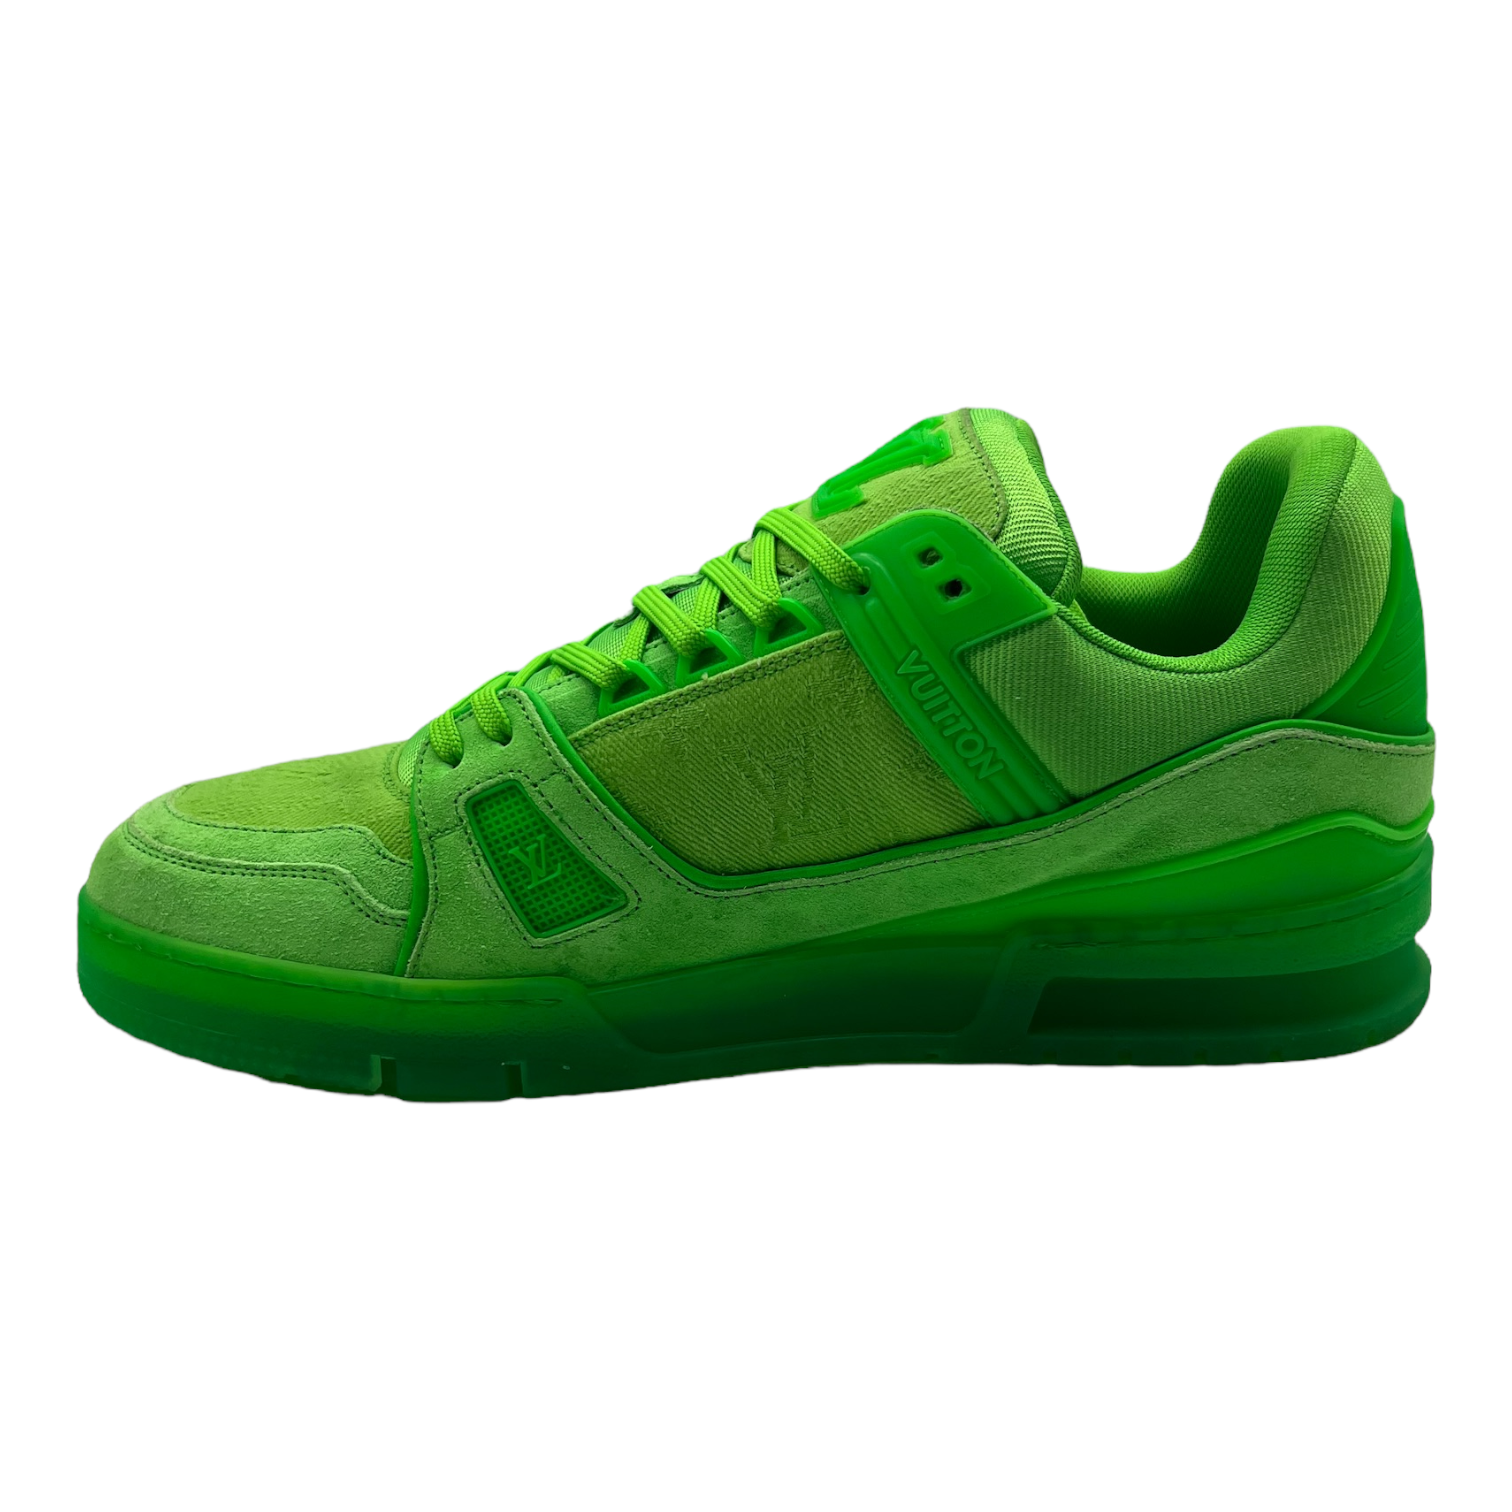 Louis Vuitton Trainer 'Green Monogram' is available now at originsnyc.com